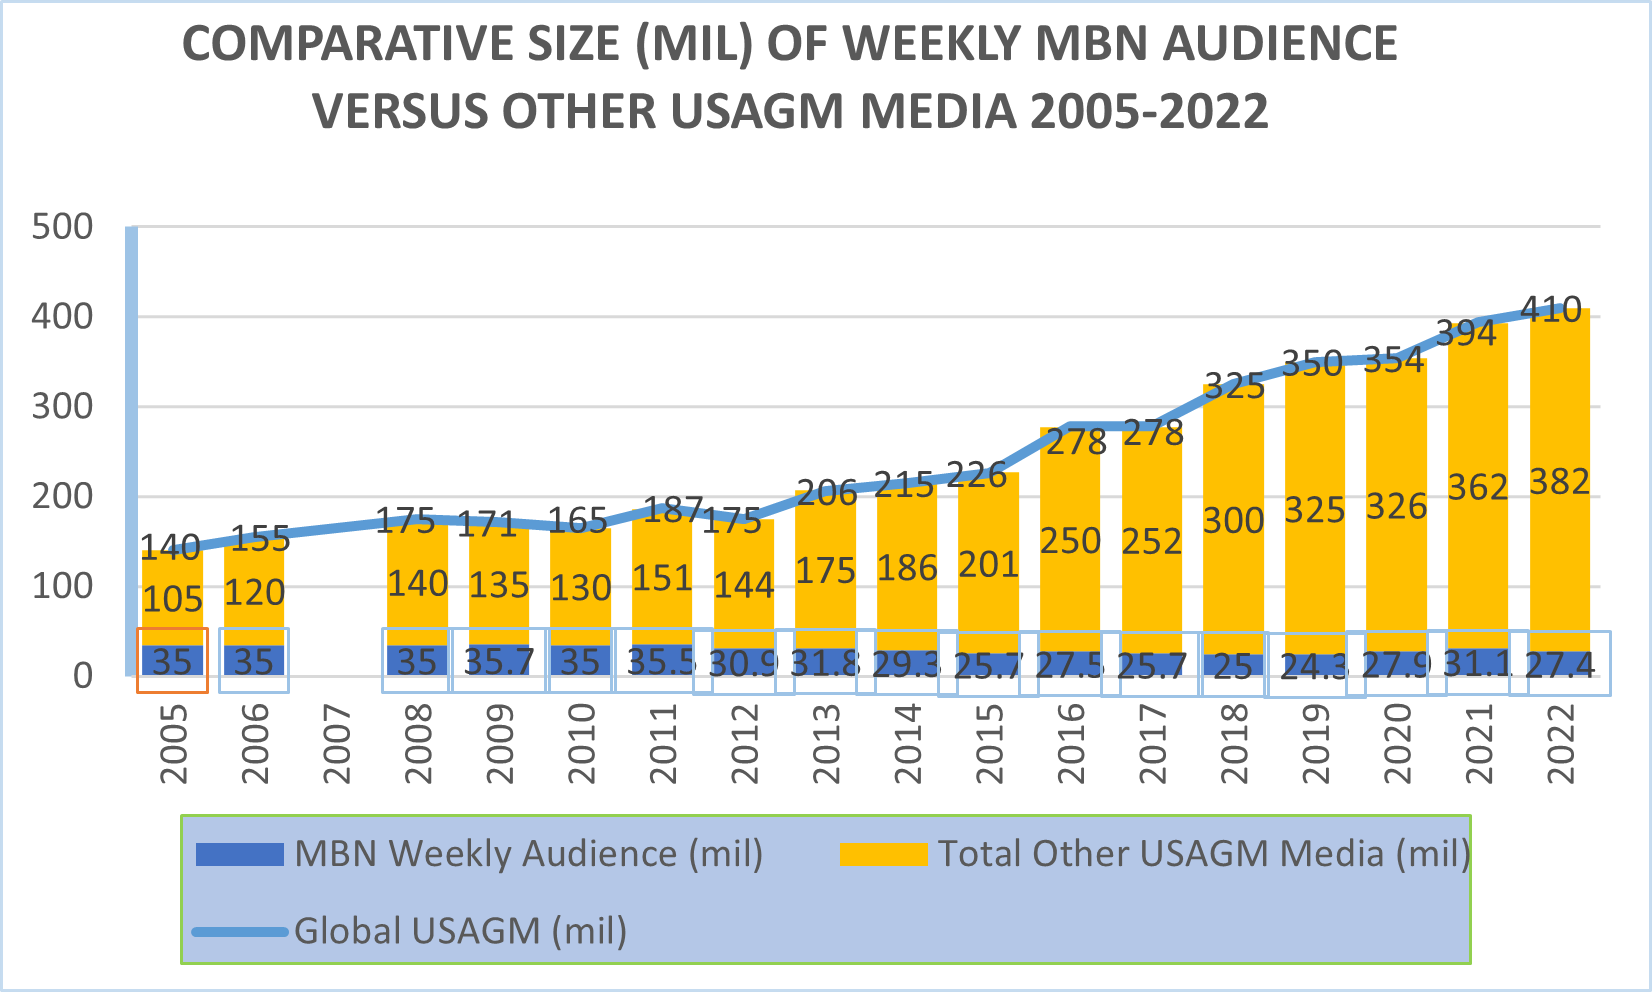 Comparative Size (Mil) Of Weekly Mbn Audience Versus Other Usagm Media, 2005-2022